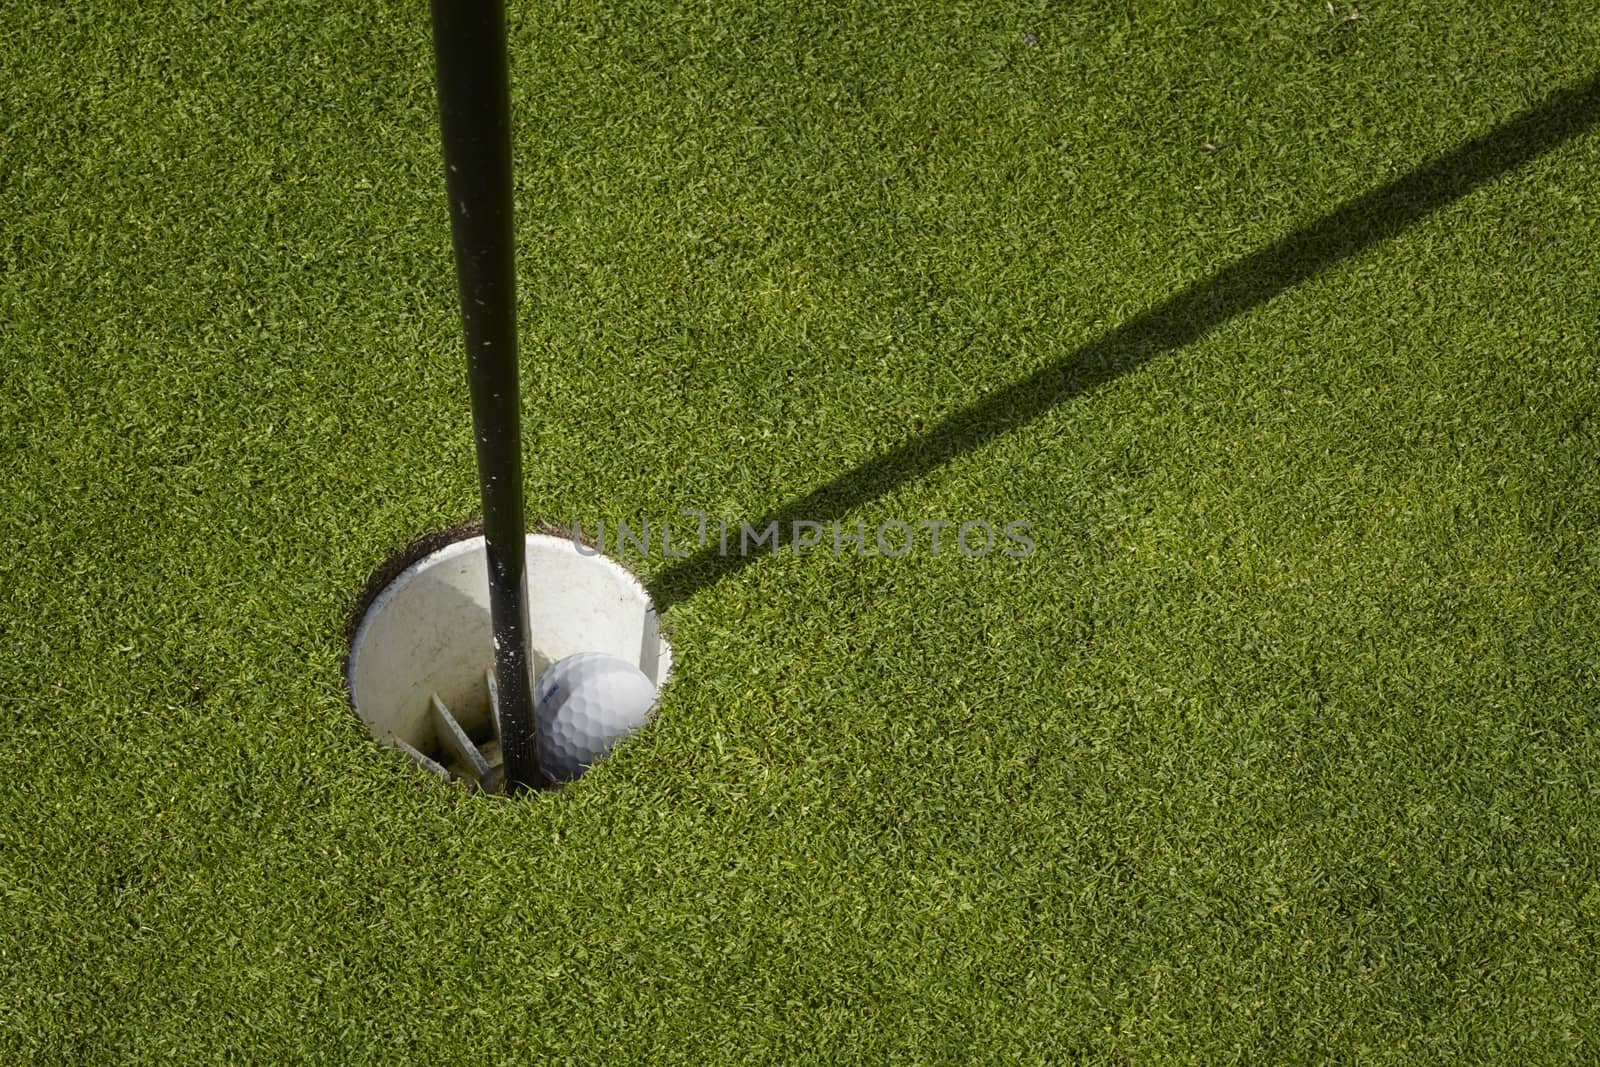 Golf ball sit inside cup on golf course putting green with flag. by janssenkruseproductions